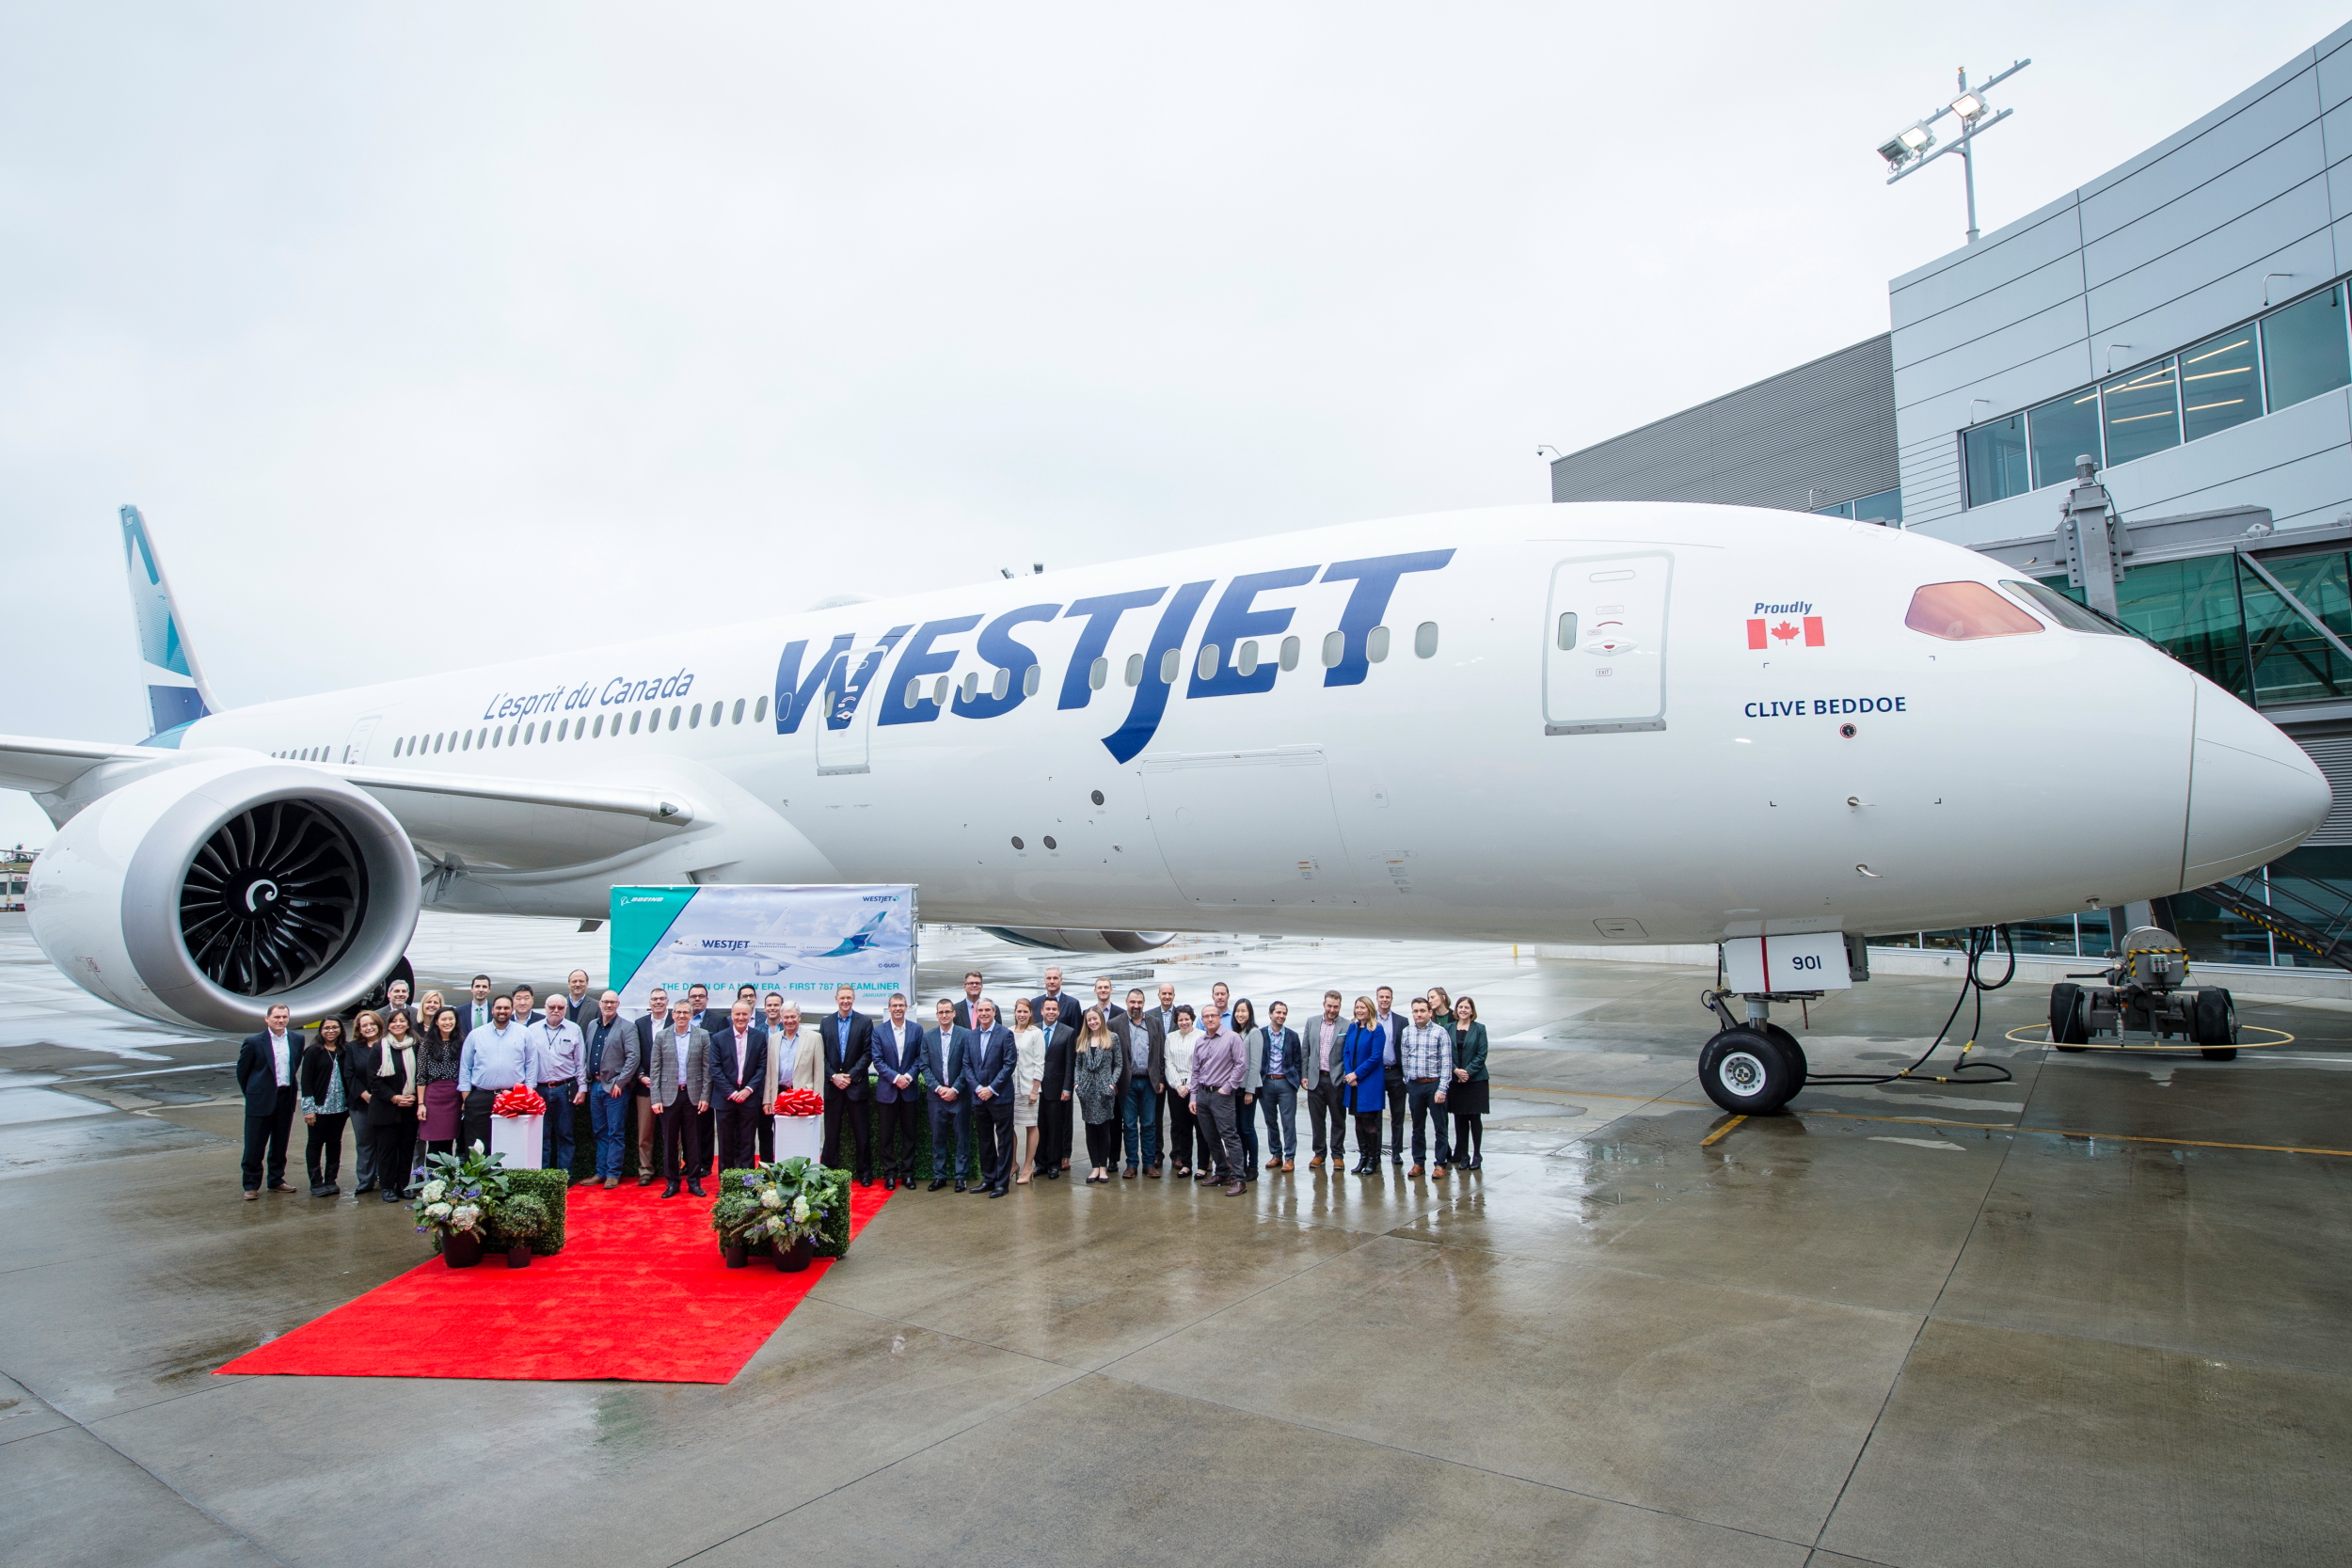 WestJet has taken delivery of the first of ten Boeing 787 Dreamliners. Having long operated a fleet of single-aisle jets, WestJet will use the long-range 787-9 Dreamliner to launch new international routes. Click to enlarge.